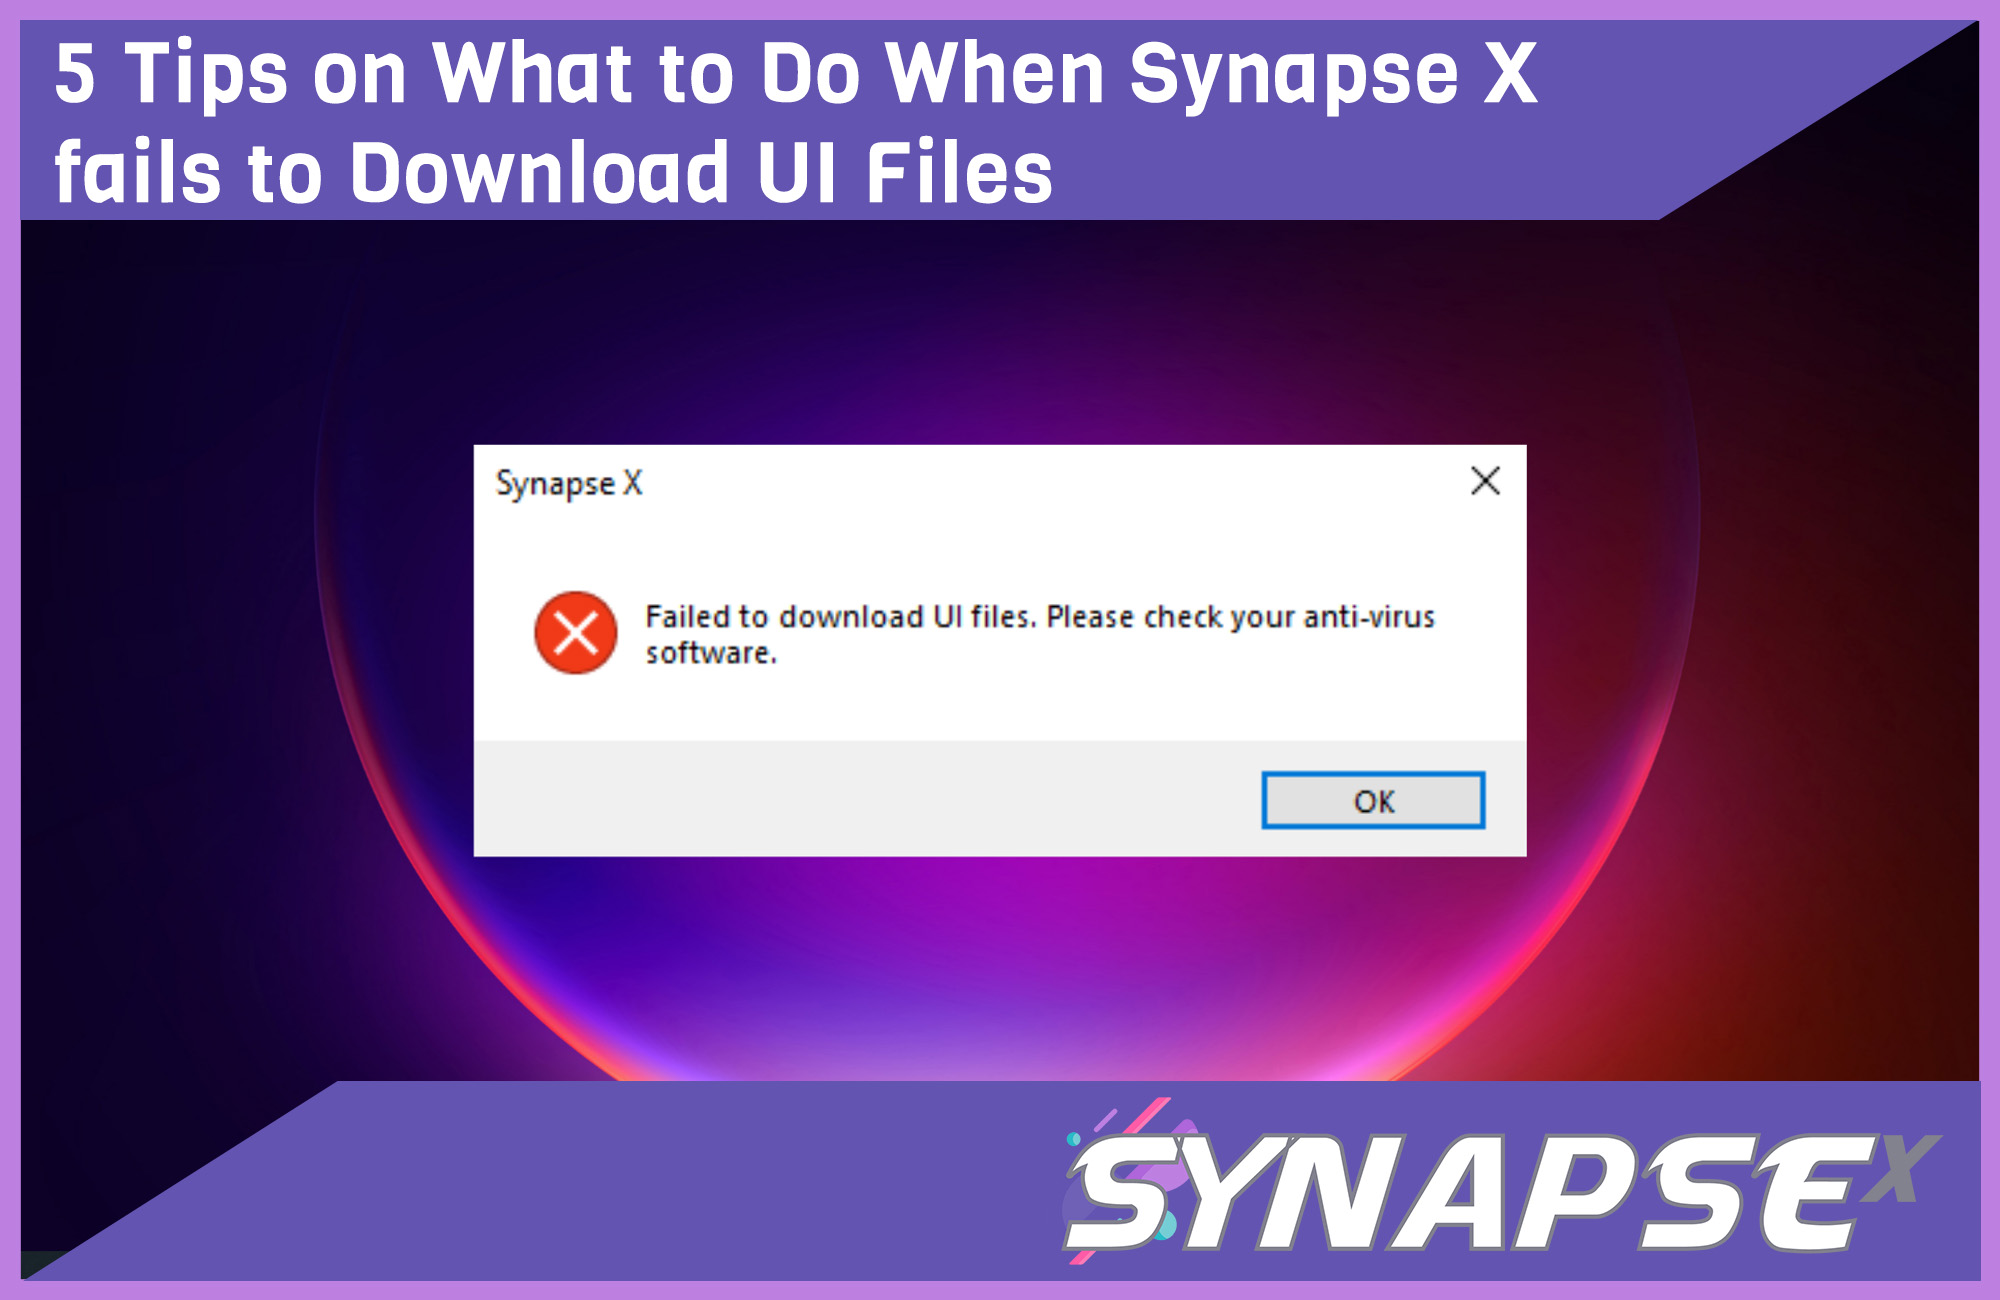 5 Tips on What to Do When Synapse X fails to Download UI Files